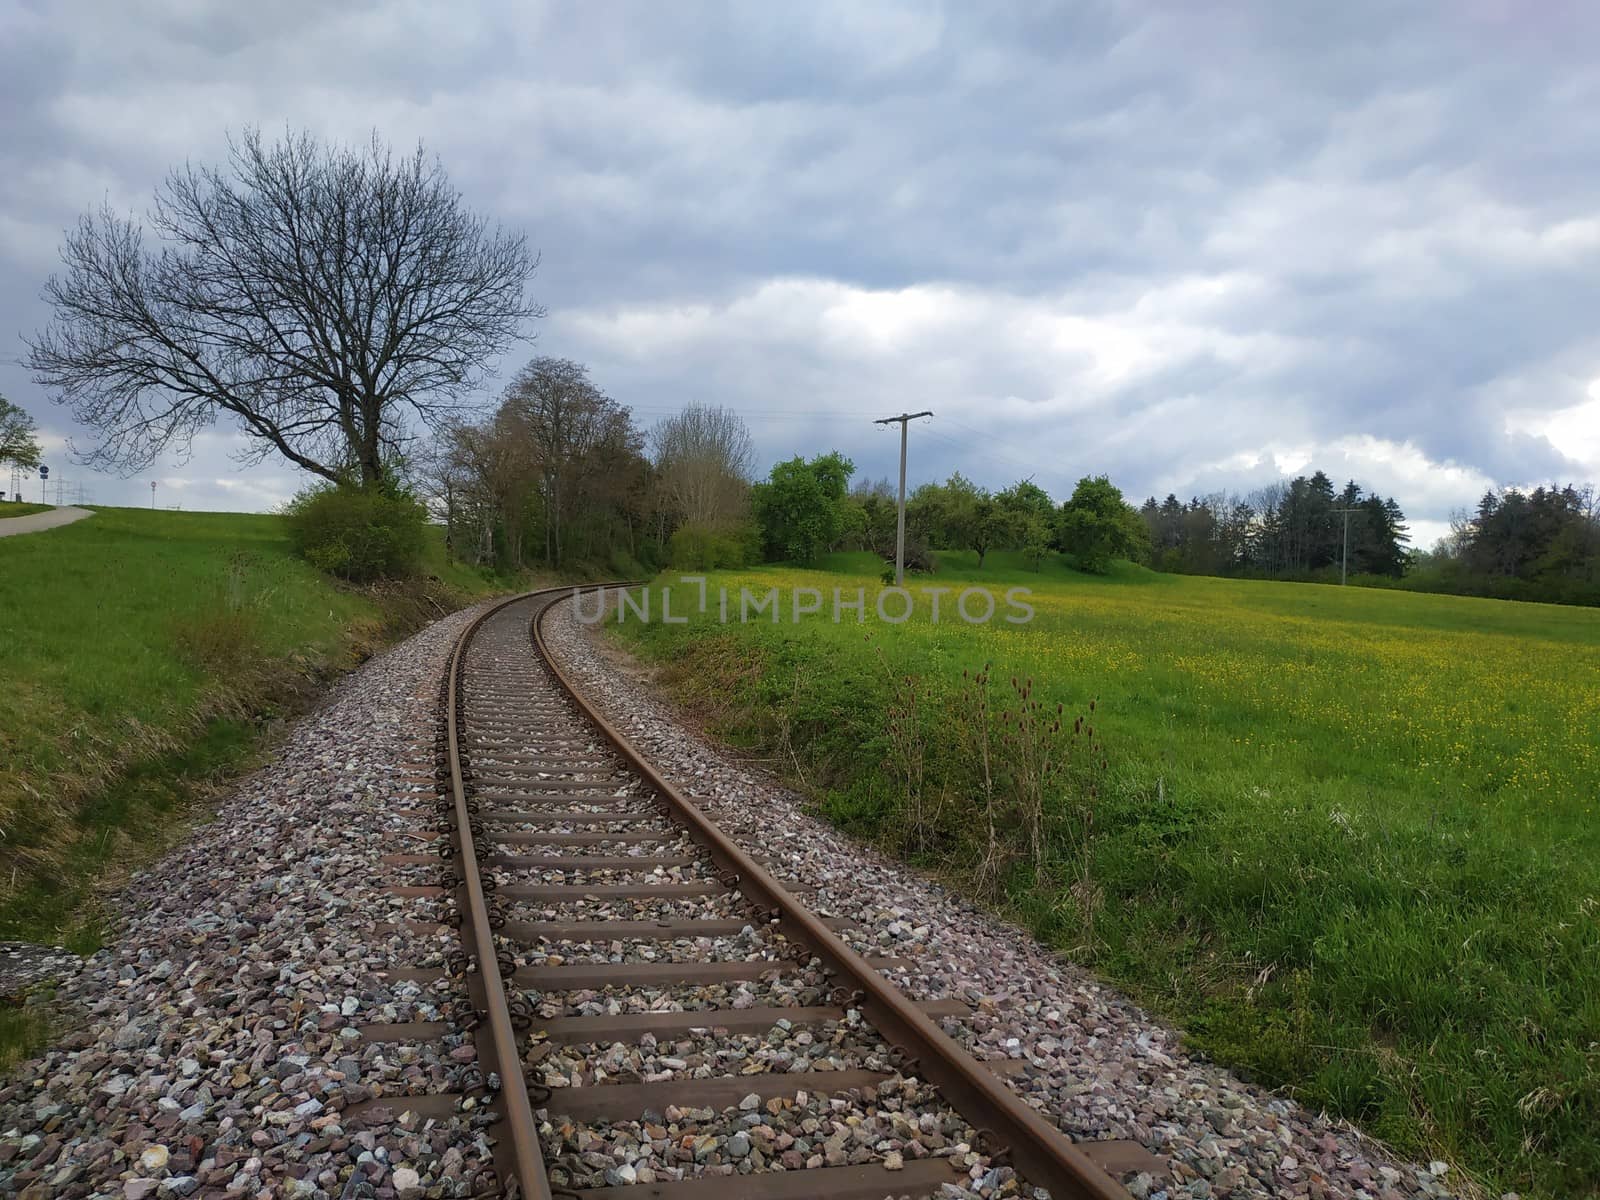 Railway track running through rural landscape in Germany by pisces2386